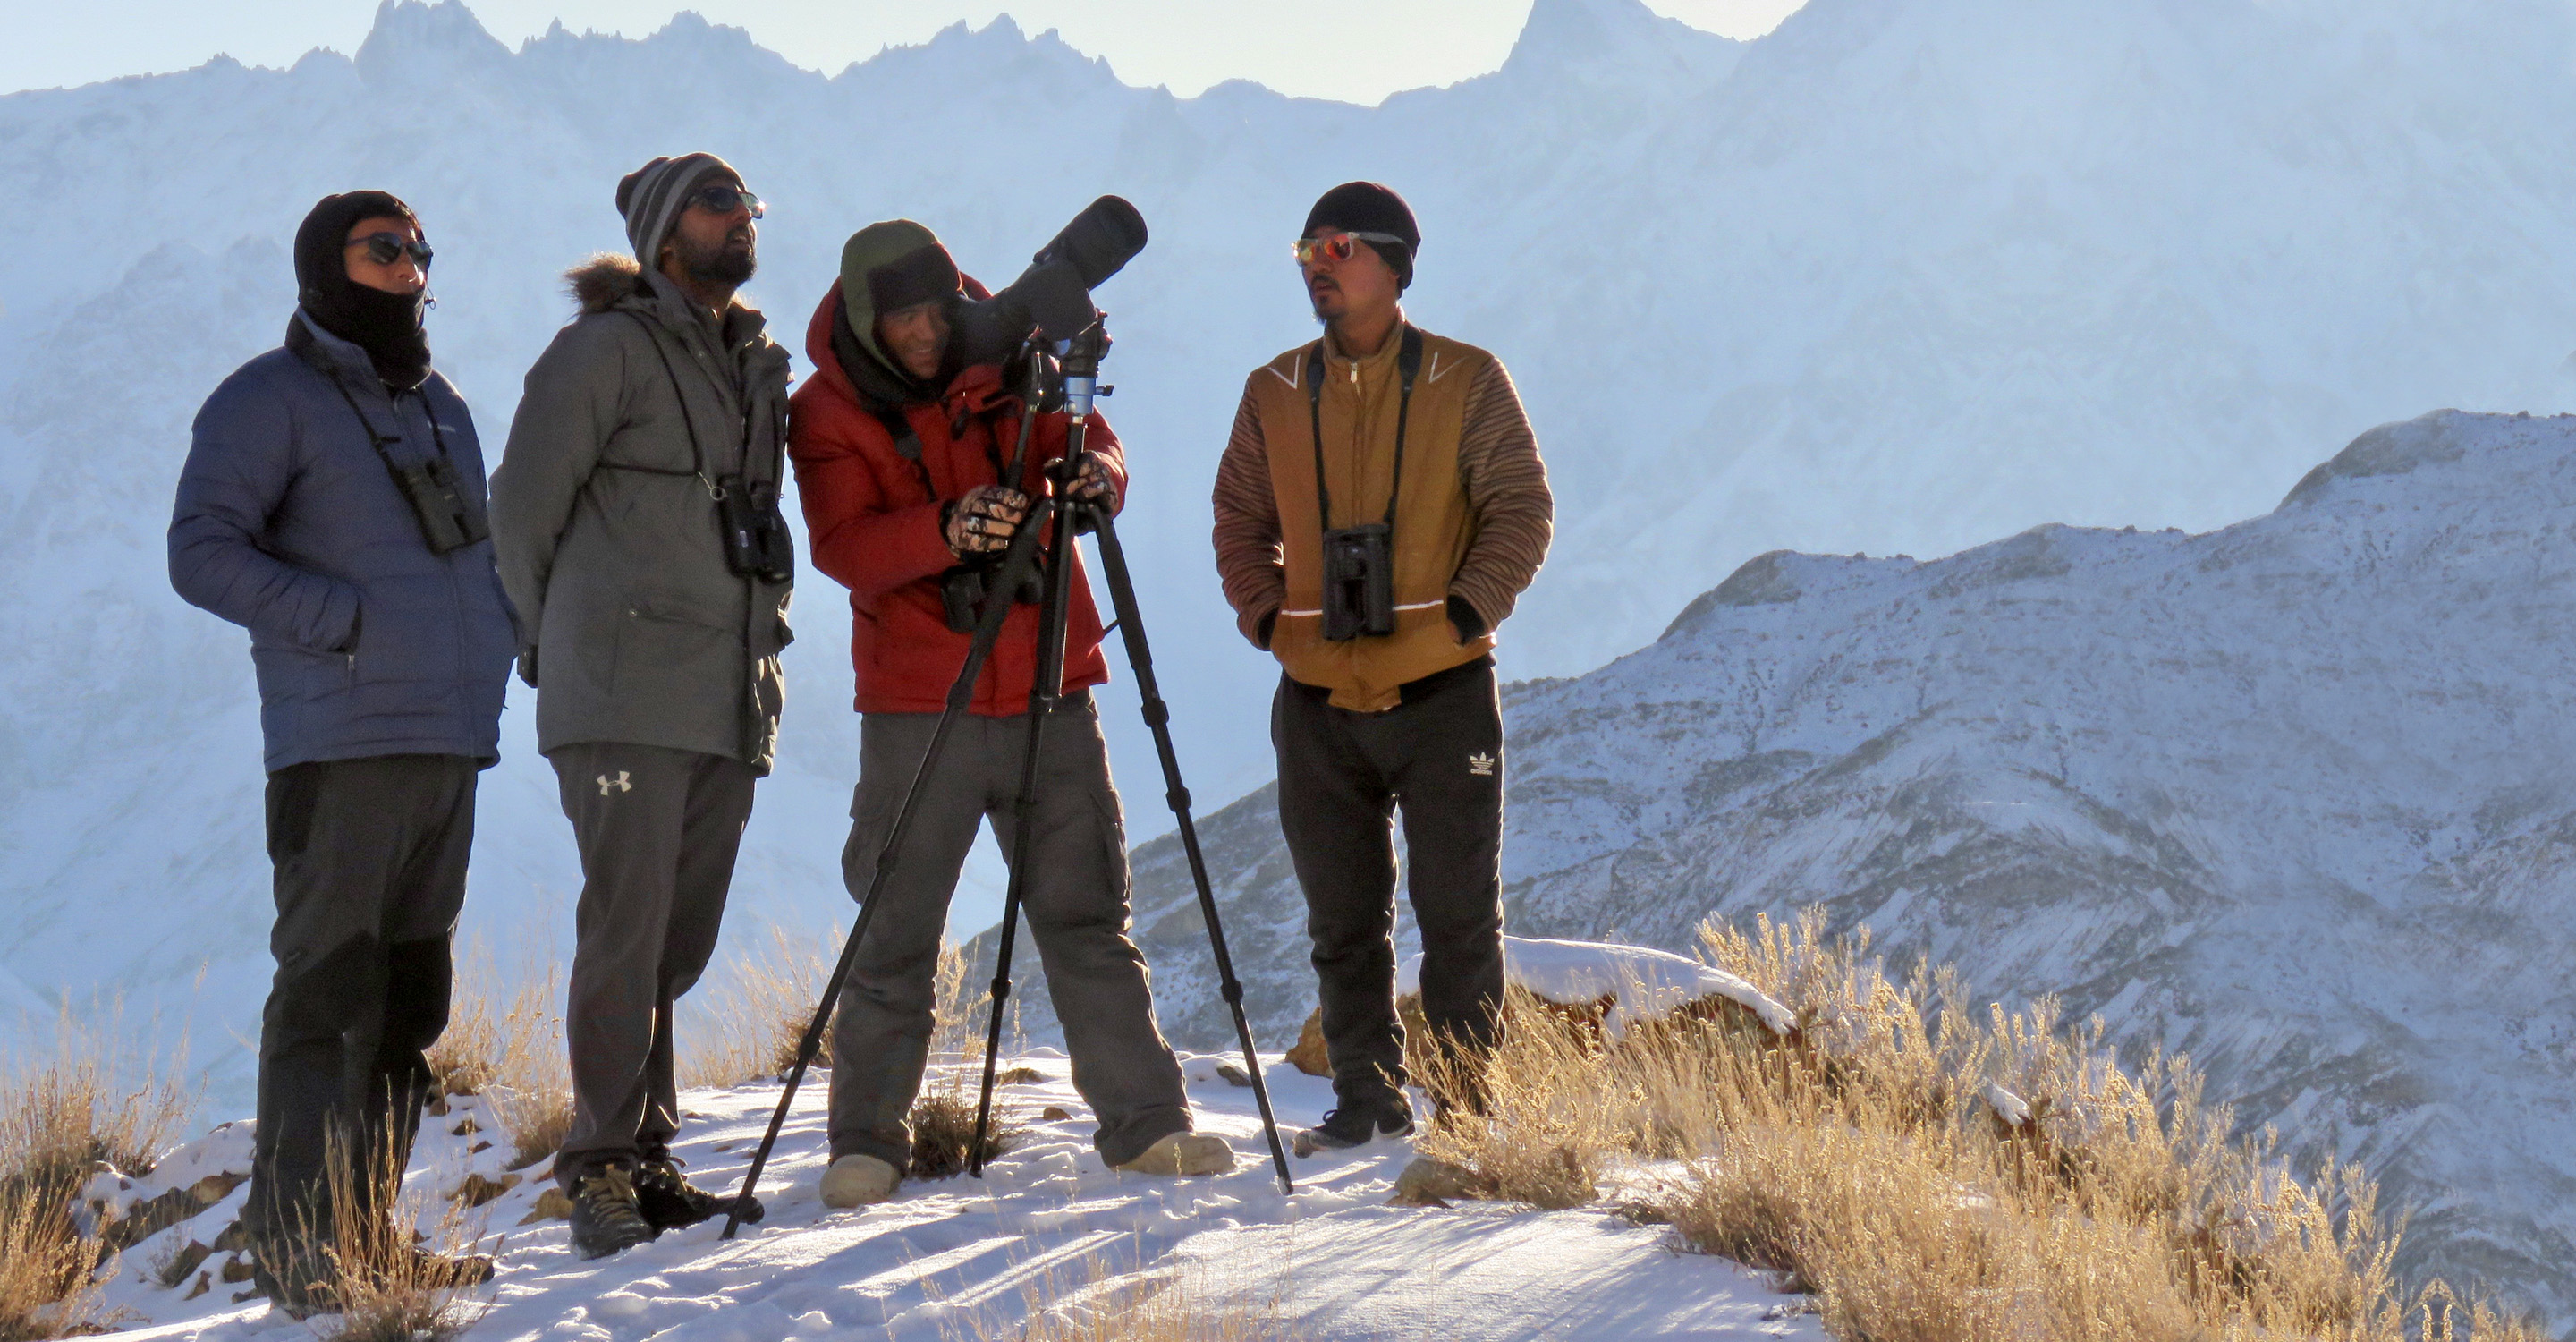 Travelers use a scope to look for snow leopards in a snowy Ladakh, India